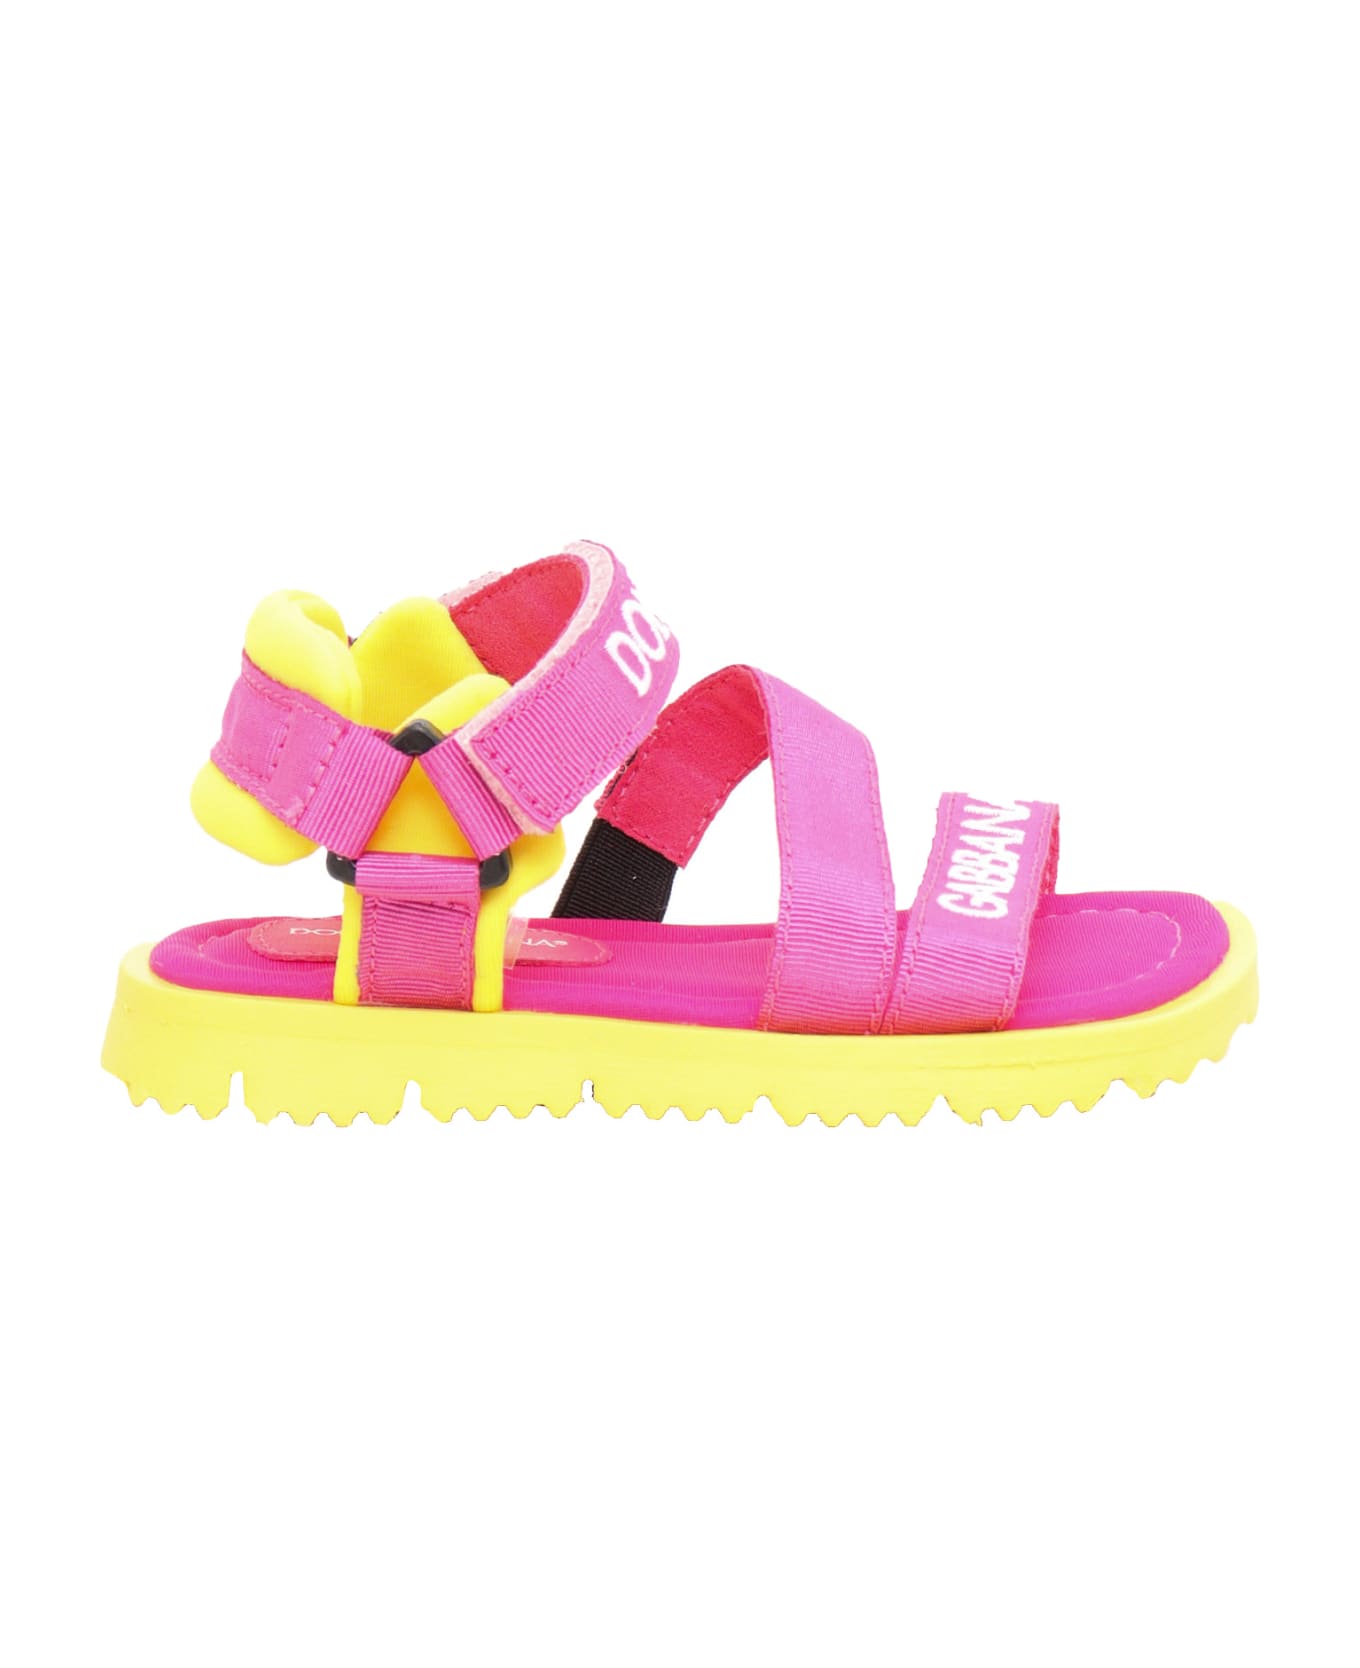 Dolce & Gabbana Pink And Yellow D&g Sandals - YELLOW シューズ